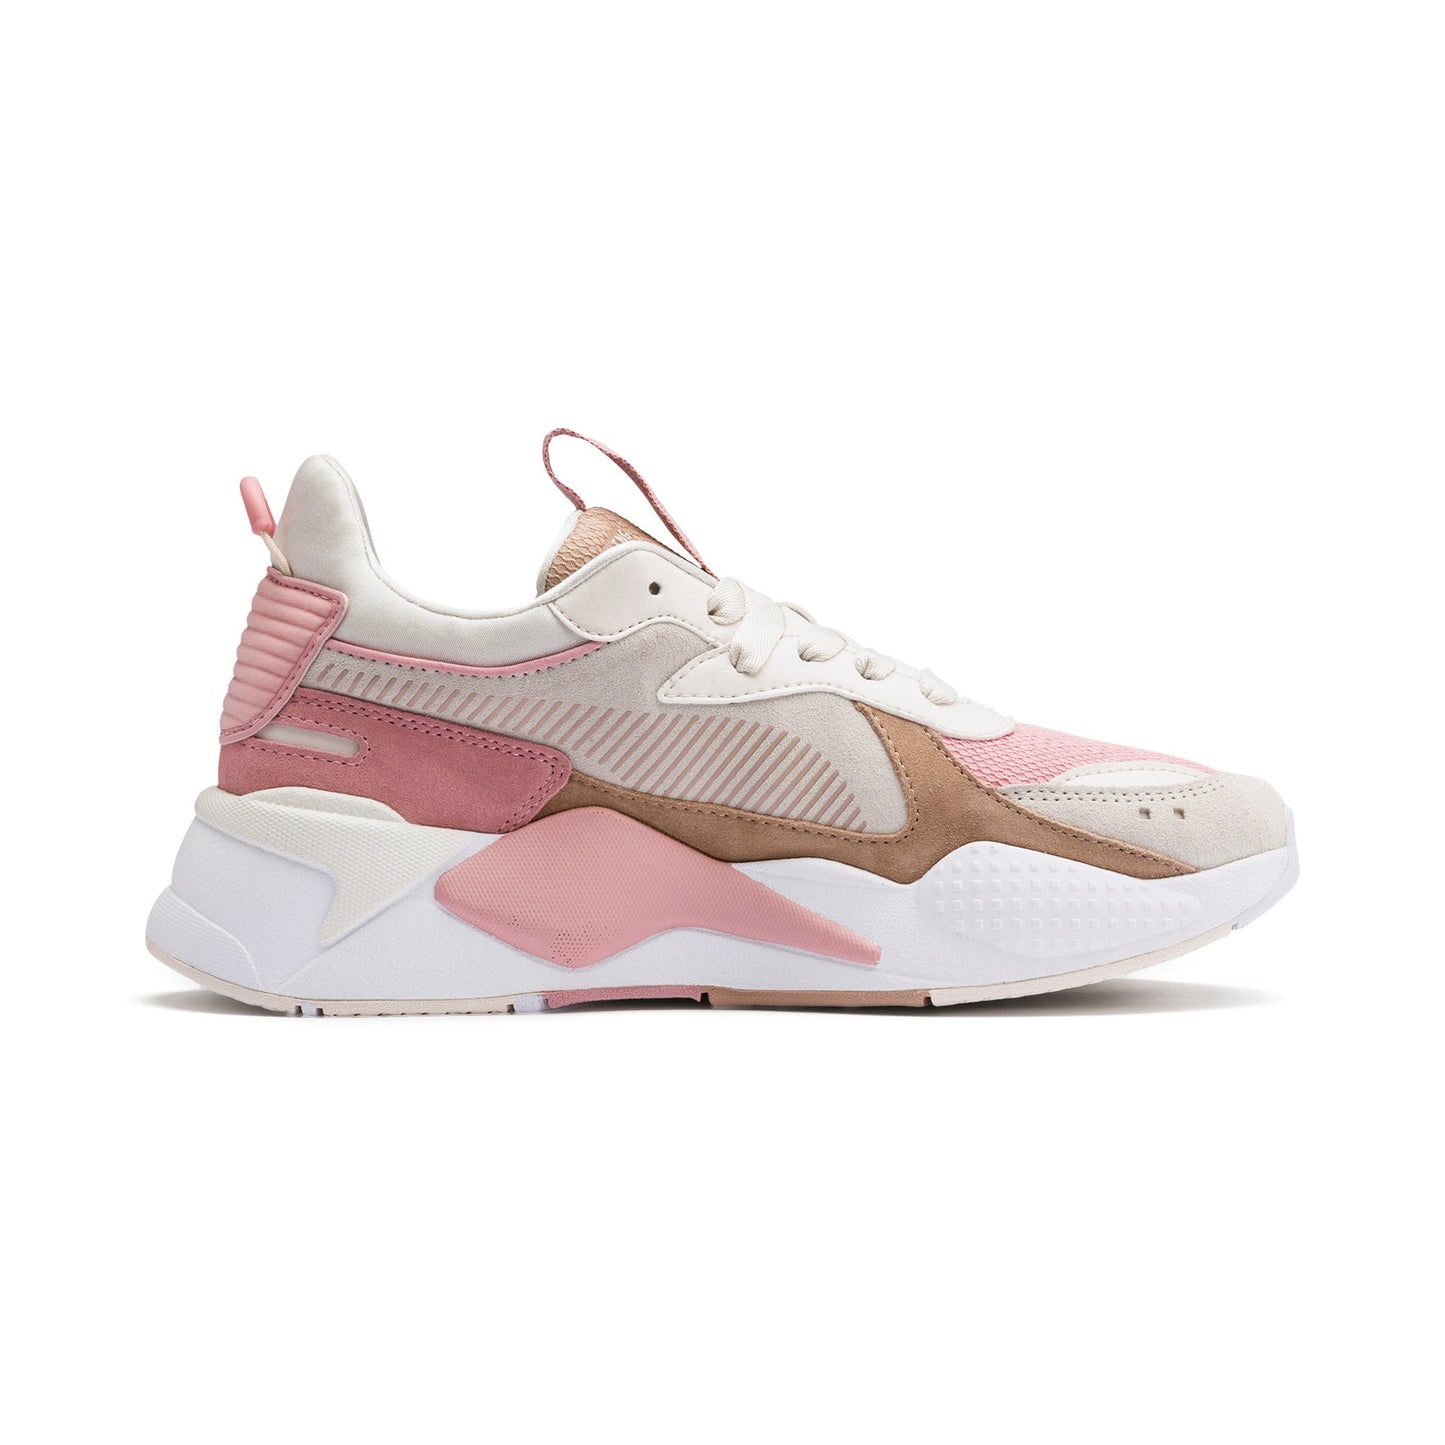 PUMA RS-X Reinvent Women's Trainers